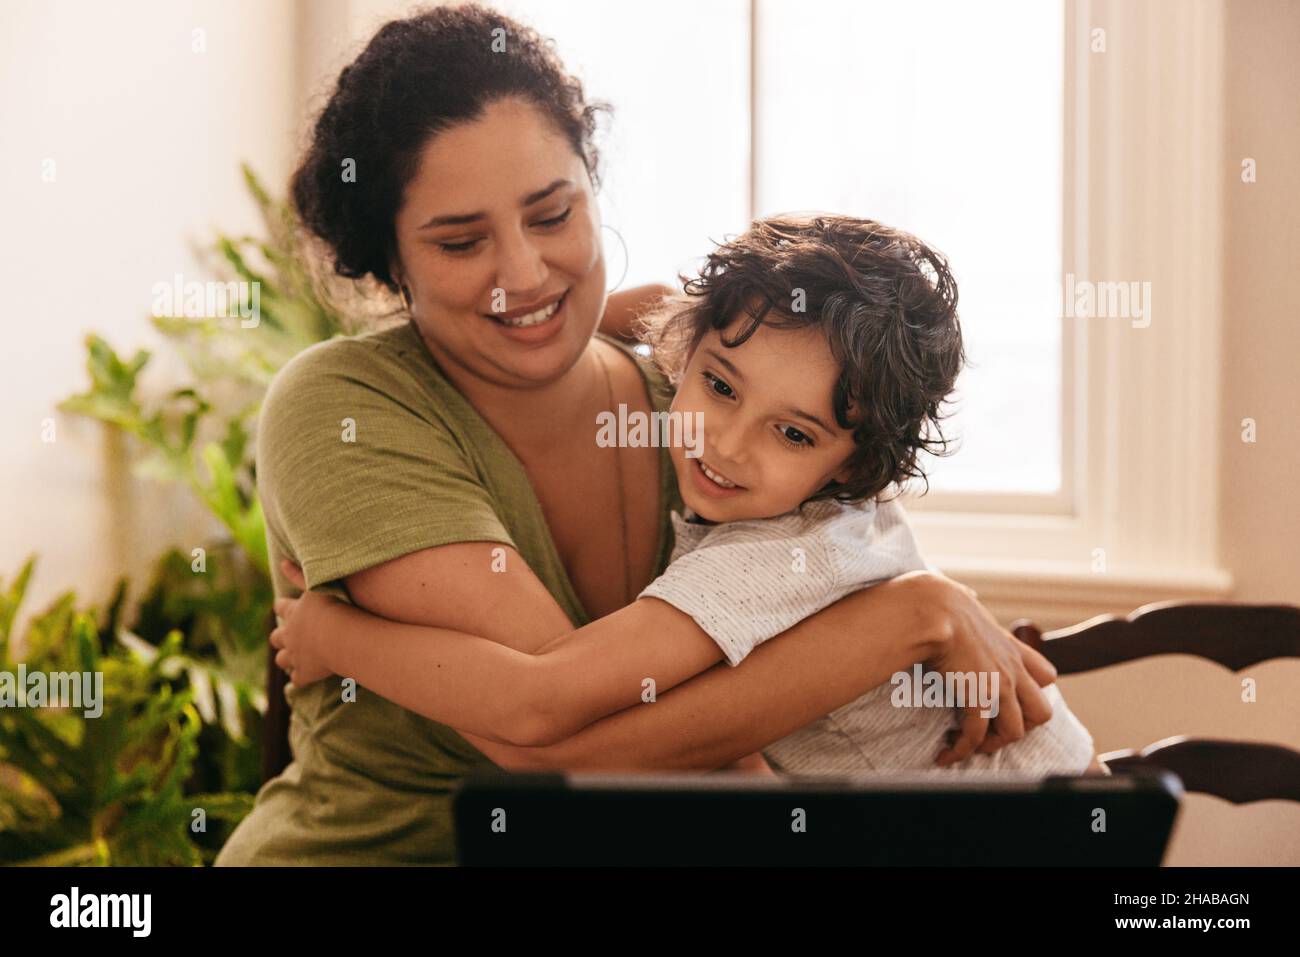 Supportive mother embracing her son while watching an online tutorial. Mother and son smiling happily while looking at a digital tablet. Loving single Stock Photo